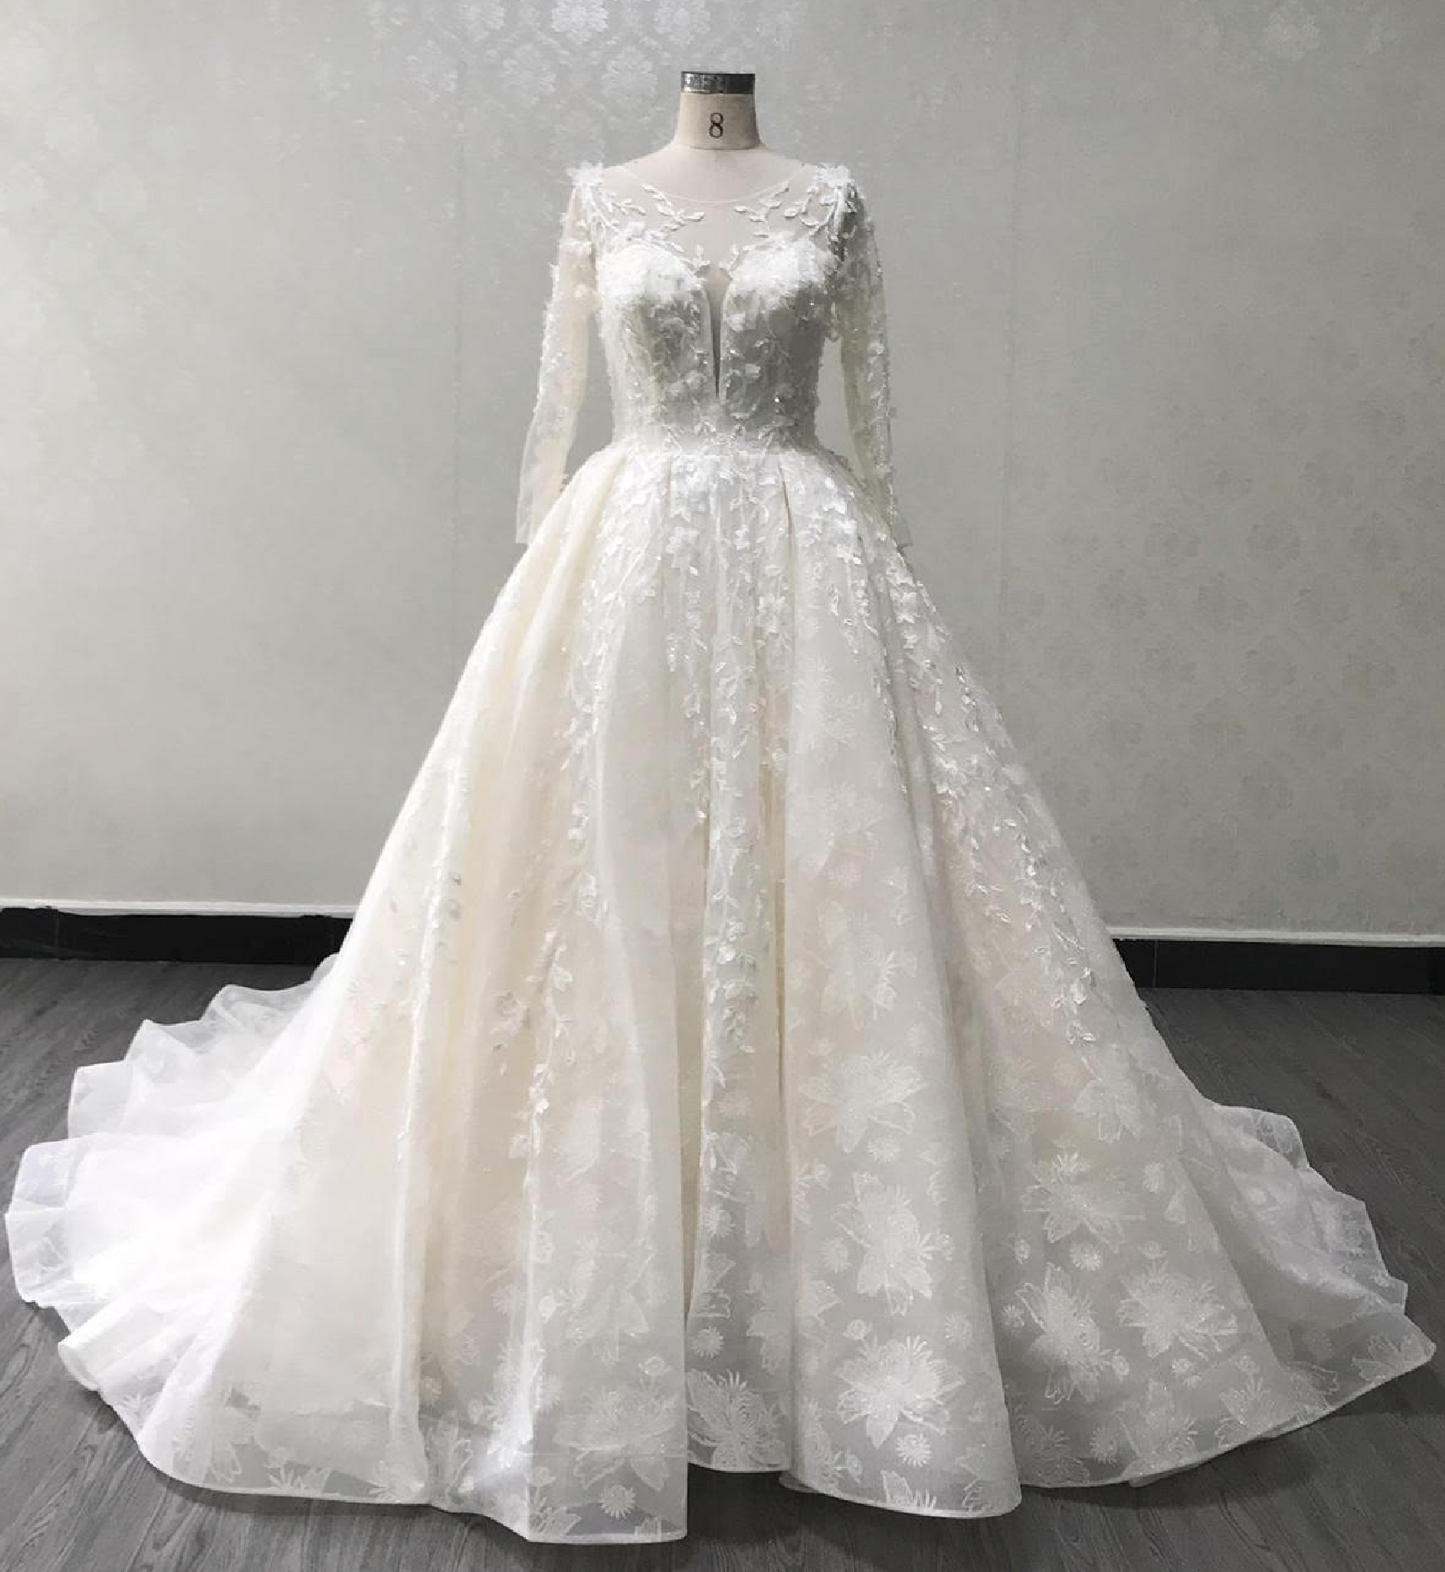 Illusion 3D Lace Pleated Skirt Bridal Gown Long Sleeve Wedding Dress